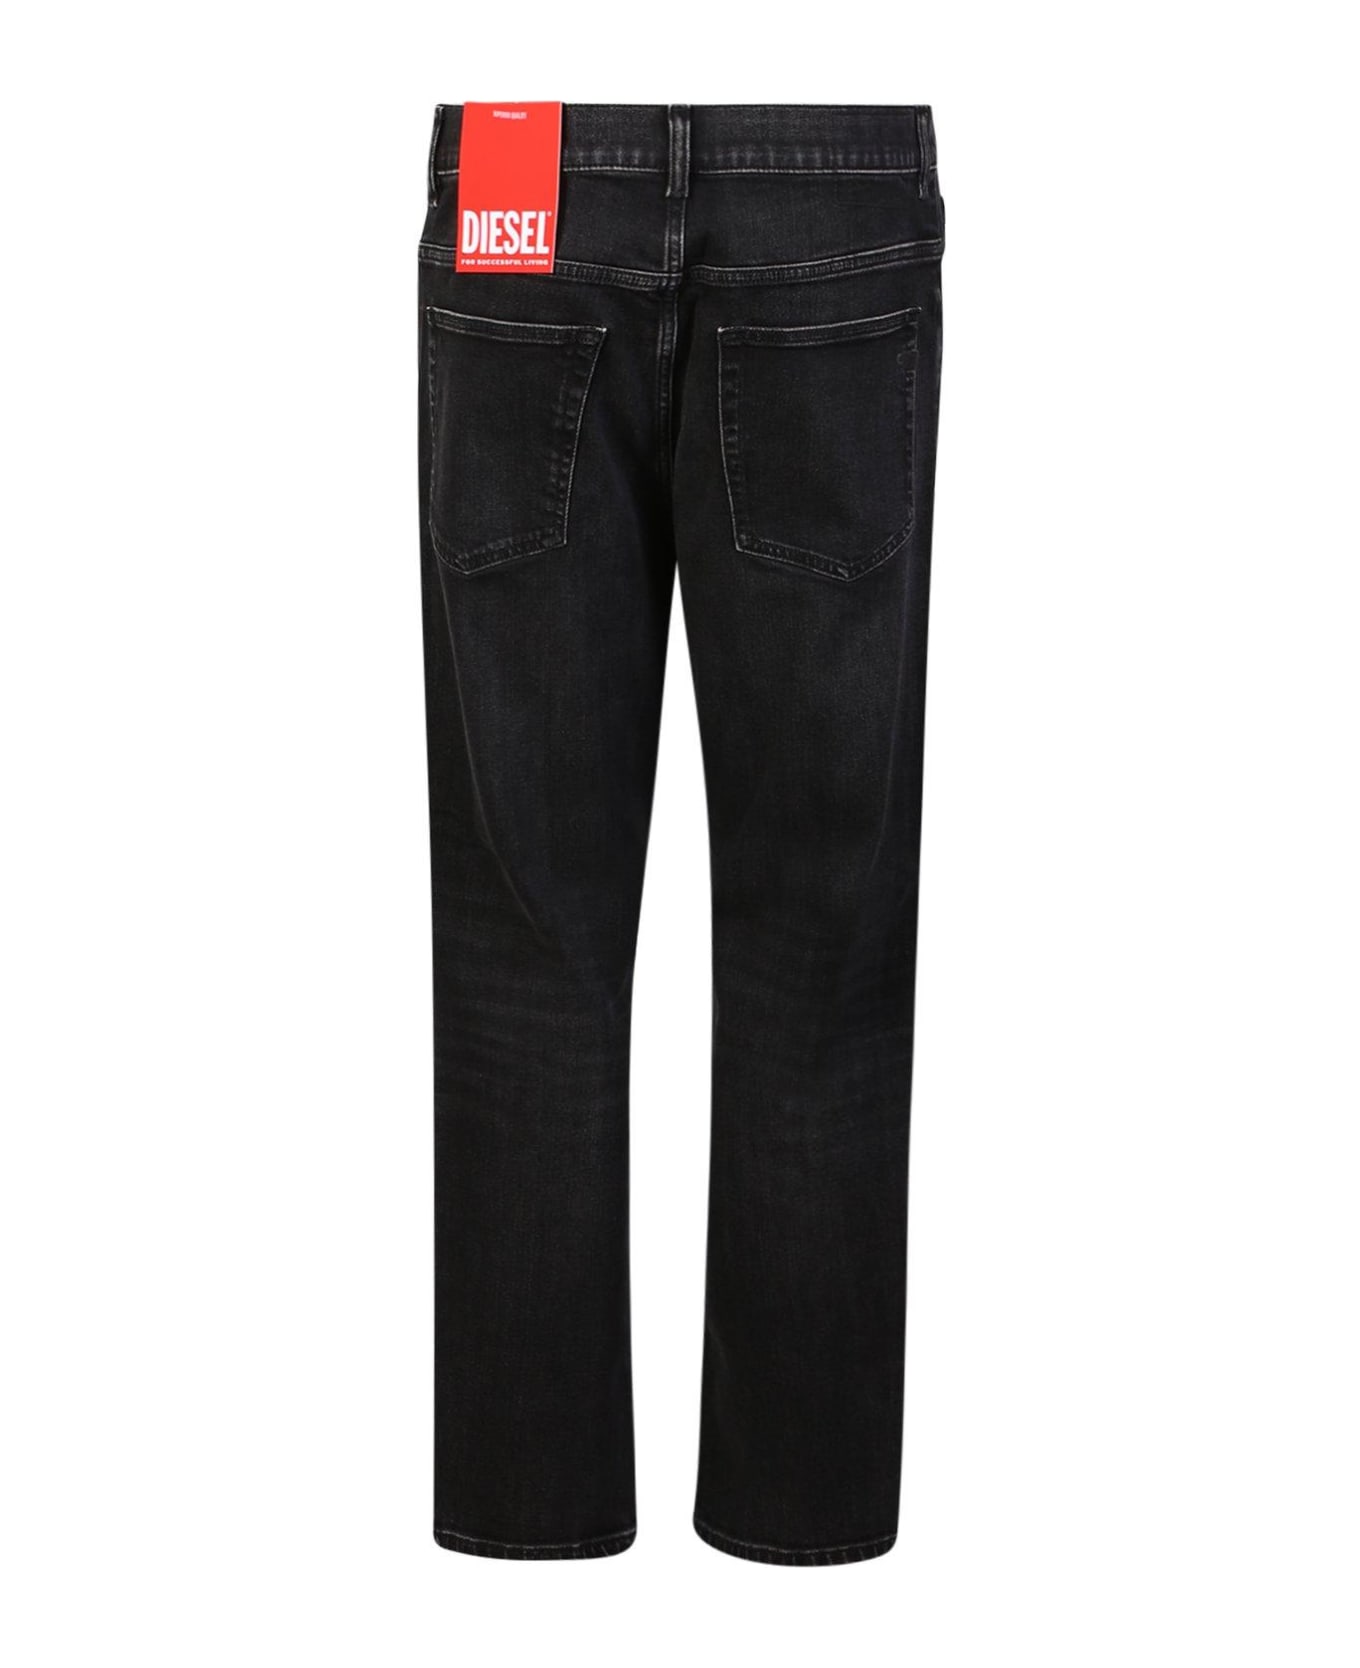 Diesel 2005 D-fining Tapered Jeans - BLUE デニム